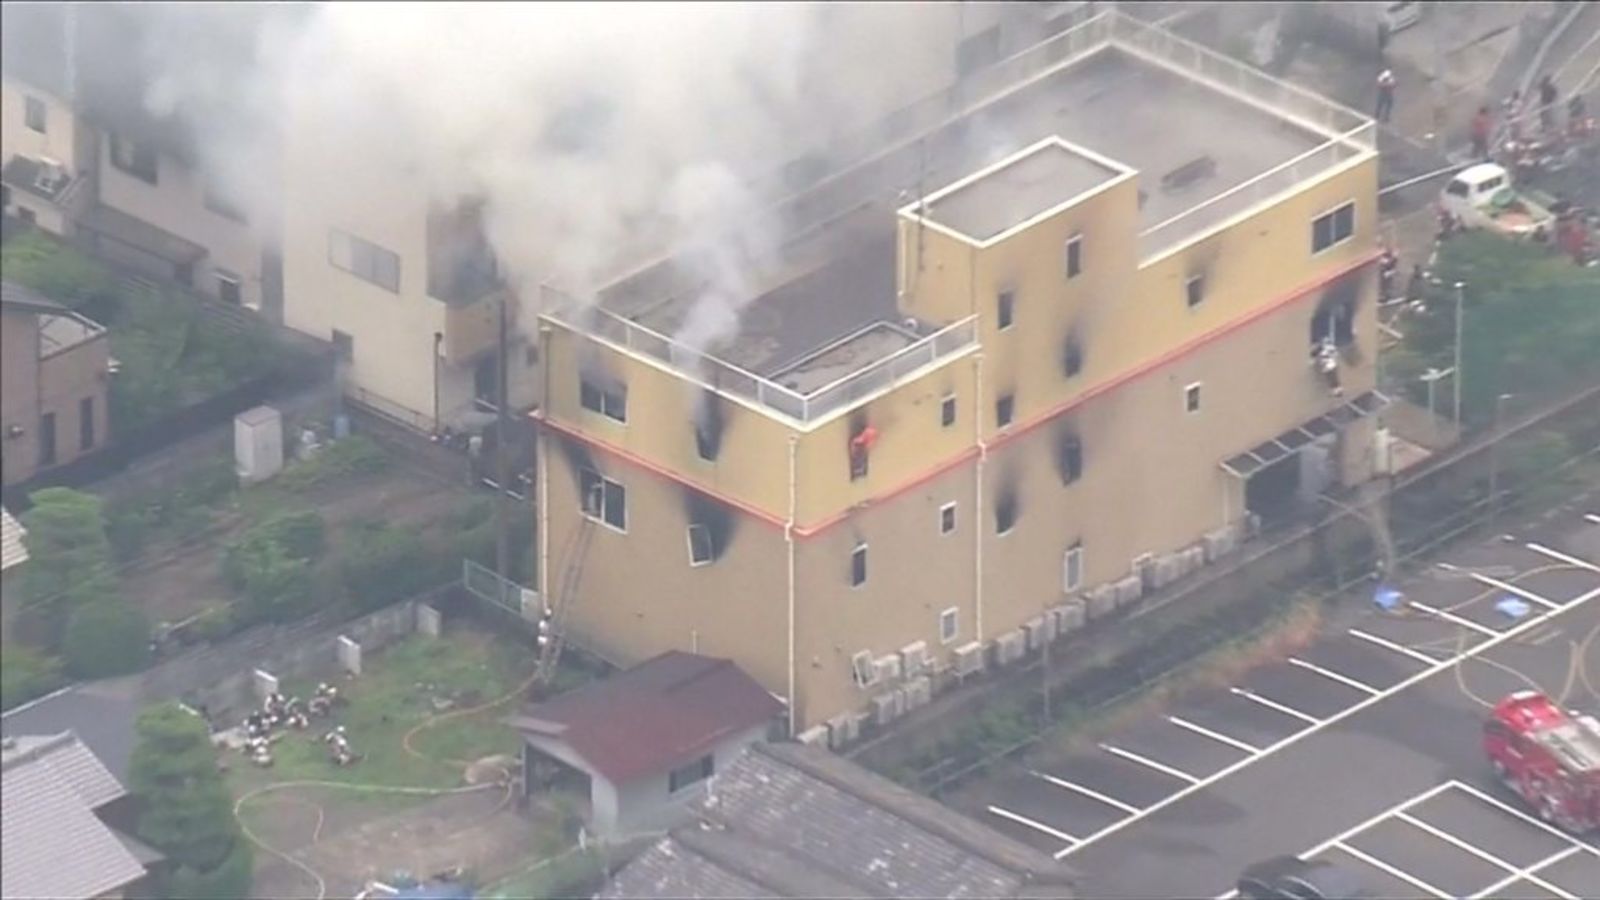 Illustration for article titled Kyoto Animation fire: Arson attack at Japan anime studio kills 33 [update with GoFundMe link]